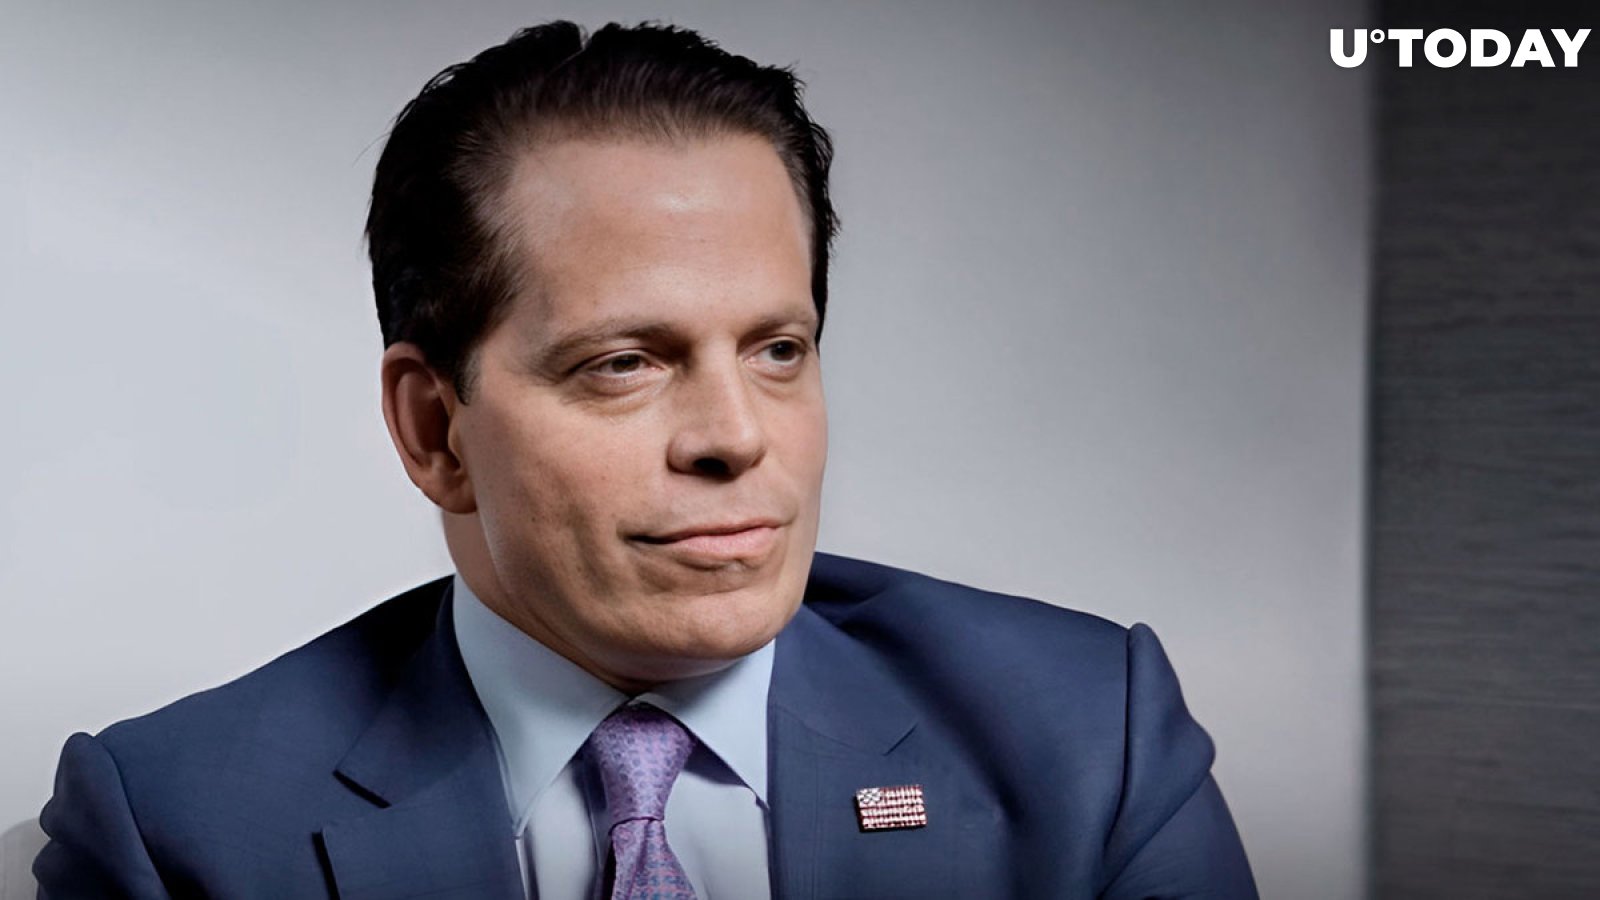 This is what the big 'crypto goal' Anthony Scaramucci is pursuing this year